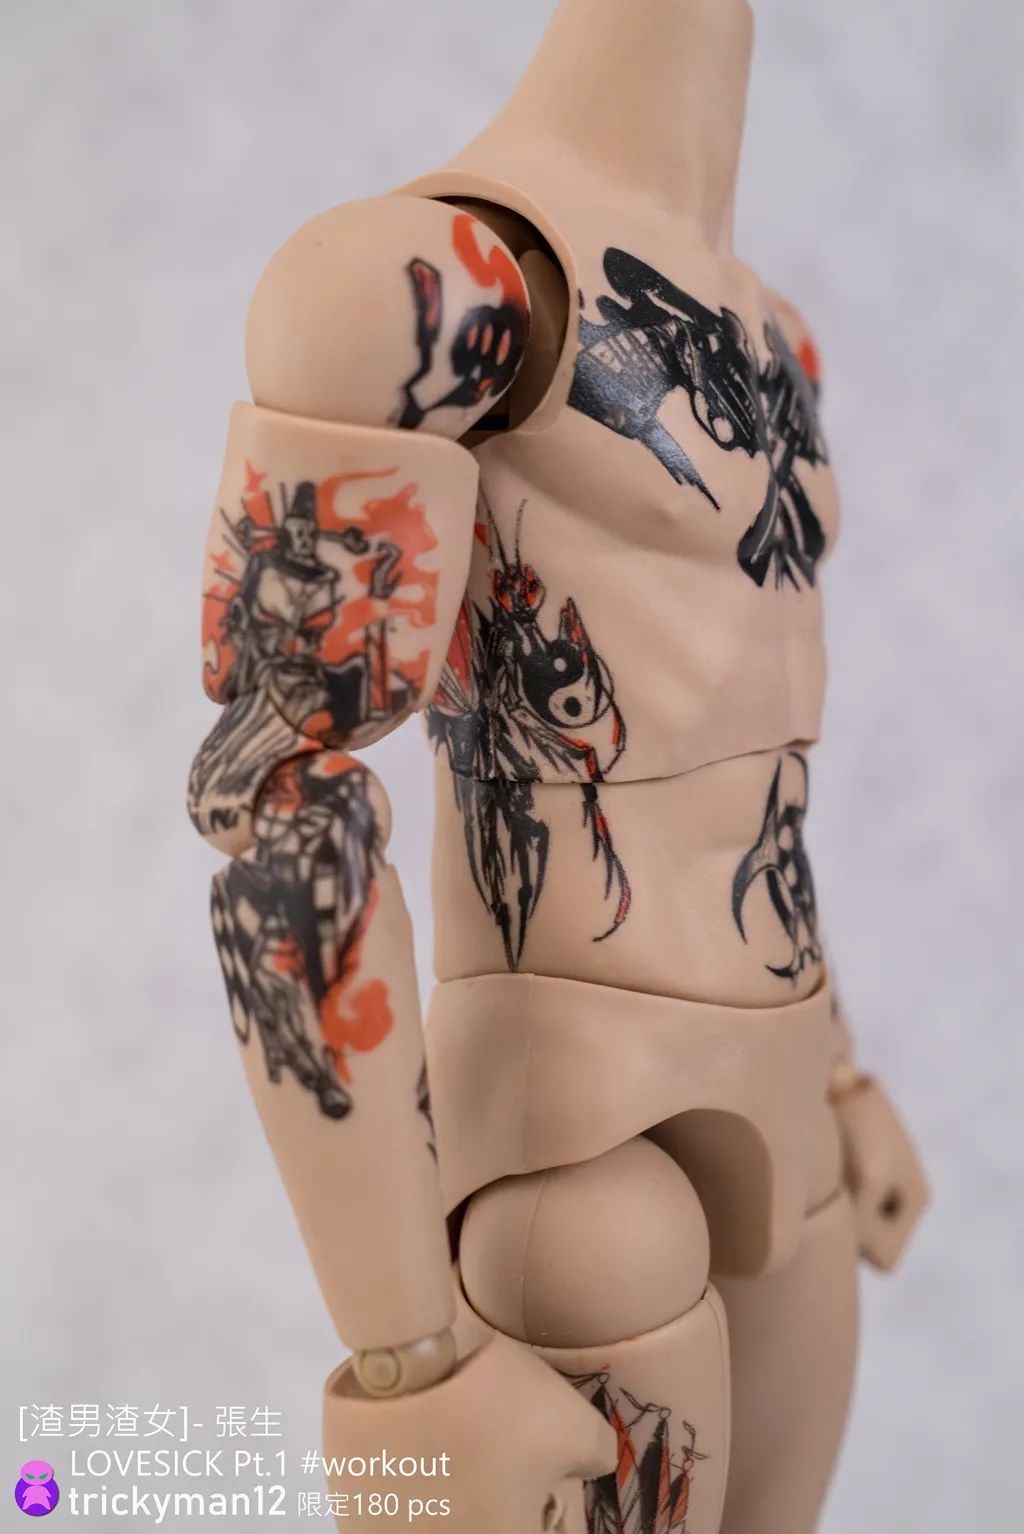 ScumbagSeries - NEW PRODUCT: Trickyman12: 1/6 "Scumbag" series - Zhang Sheng LOVESICK Pt.1 action figure 17562711